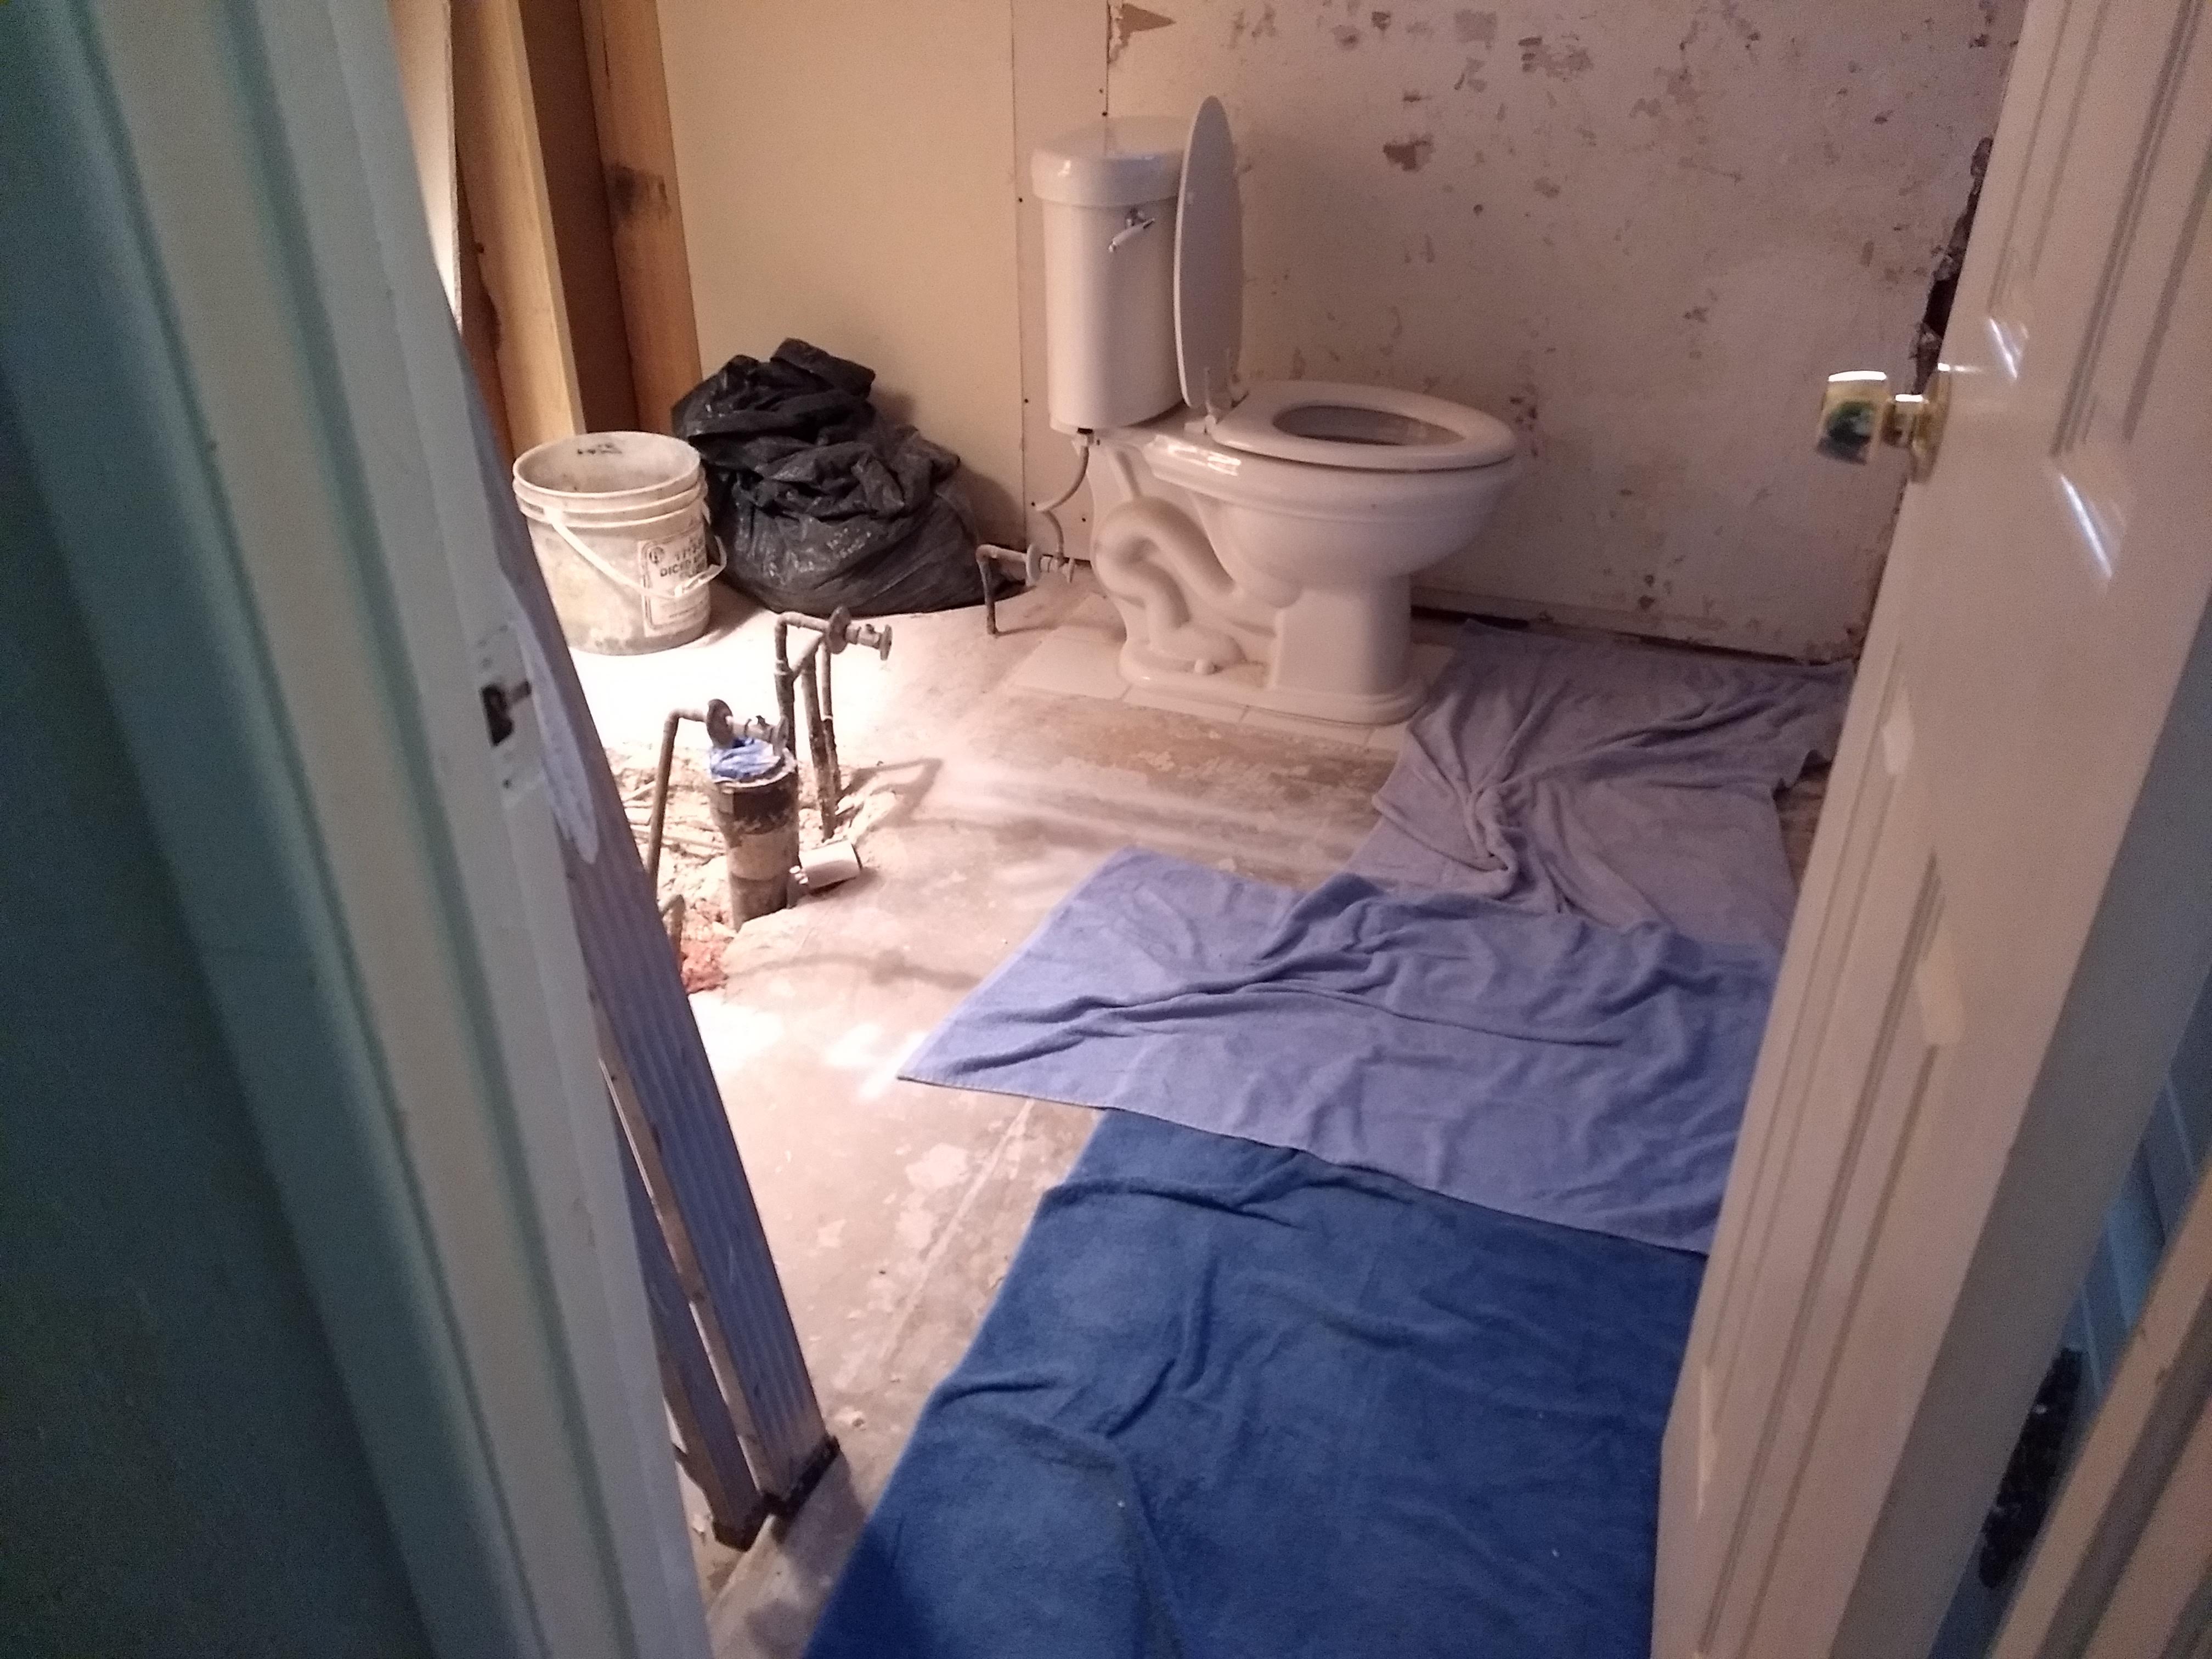 $20000 Bathroom We've Been Waiting on for 6 Months